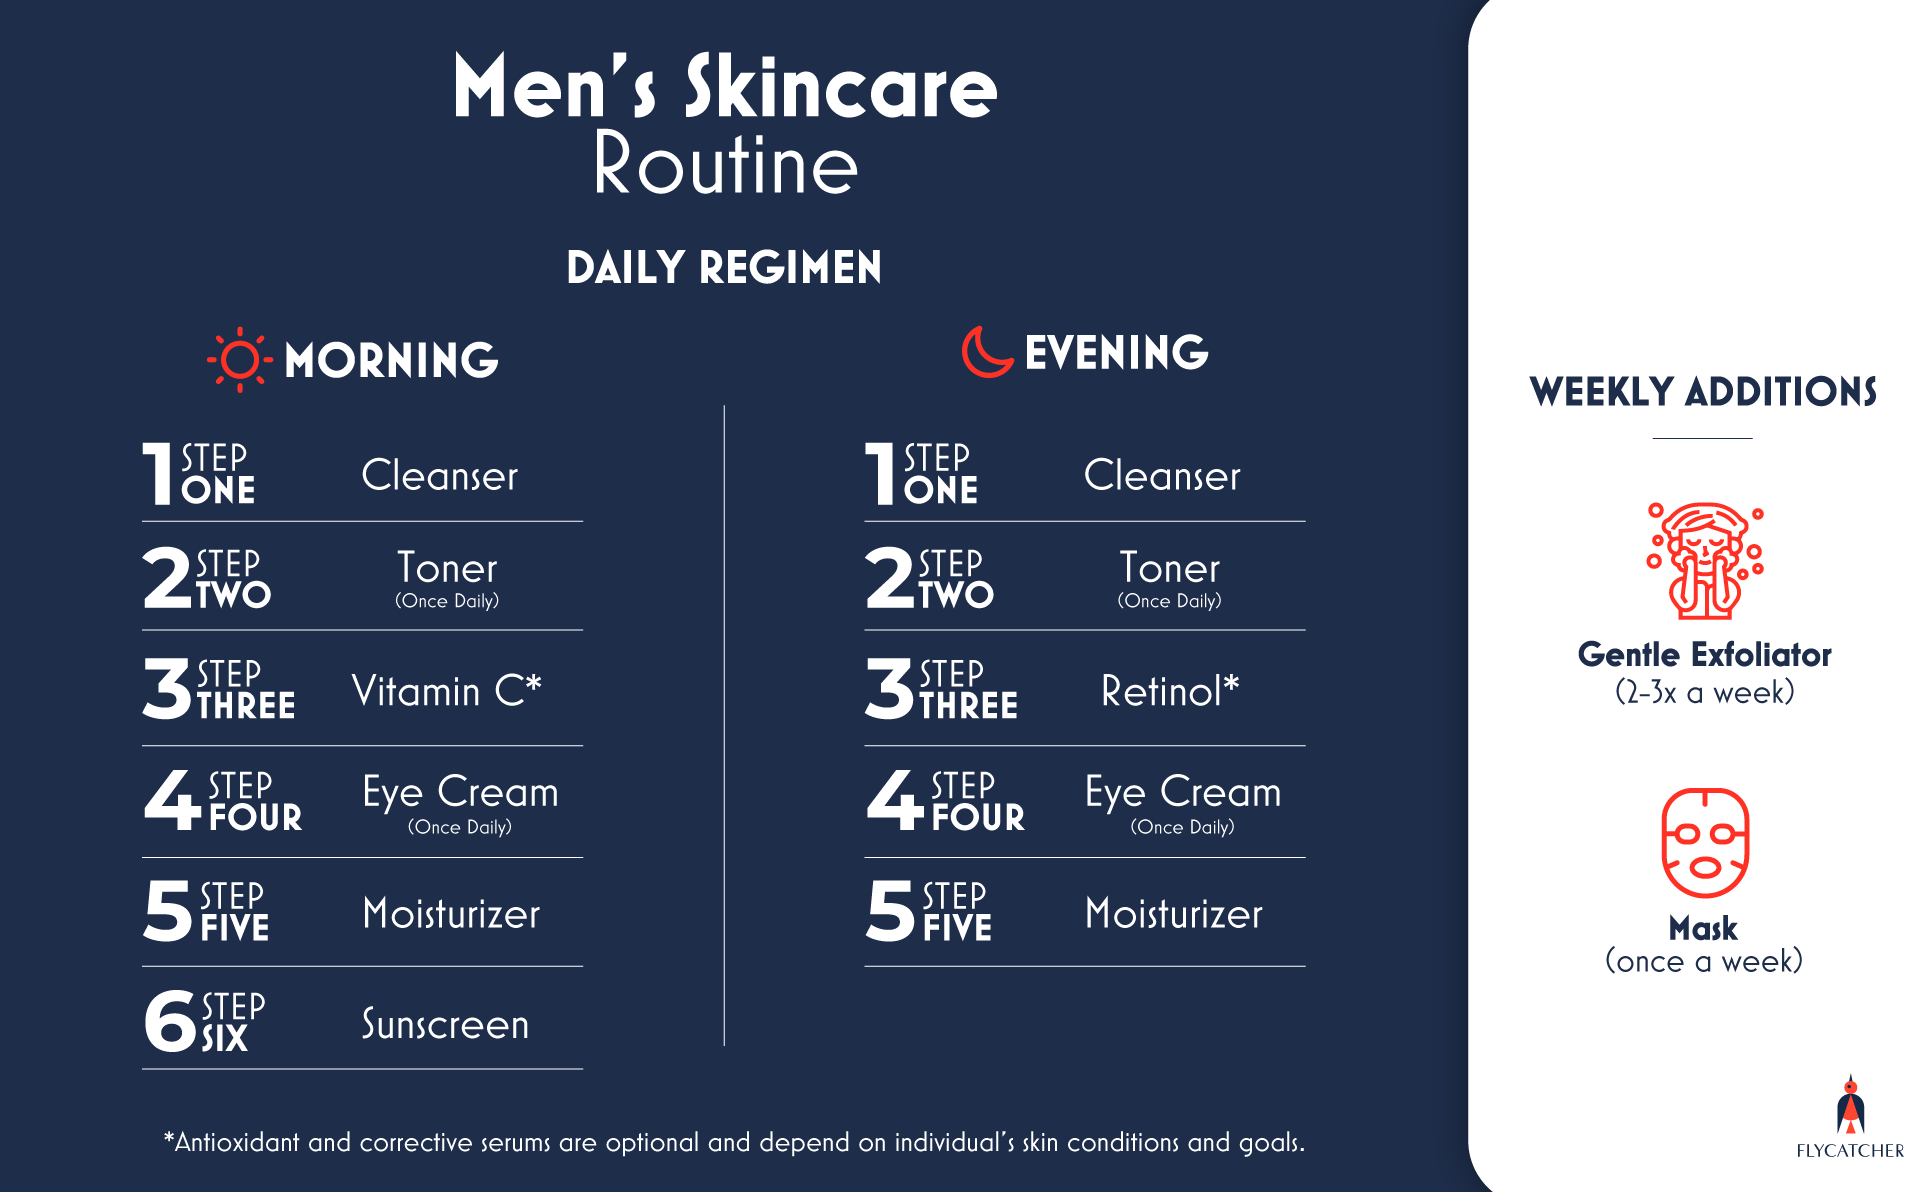 infographic outlining Flycatcher recommended daily skincare routine for men